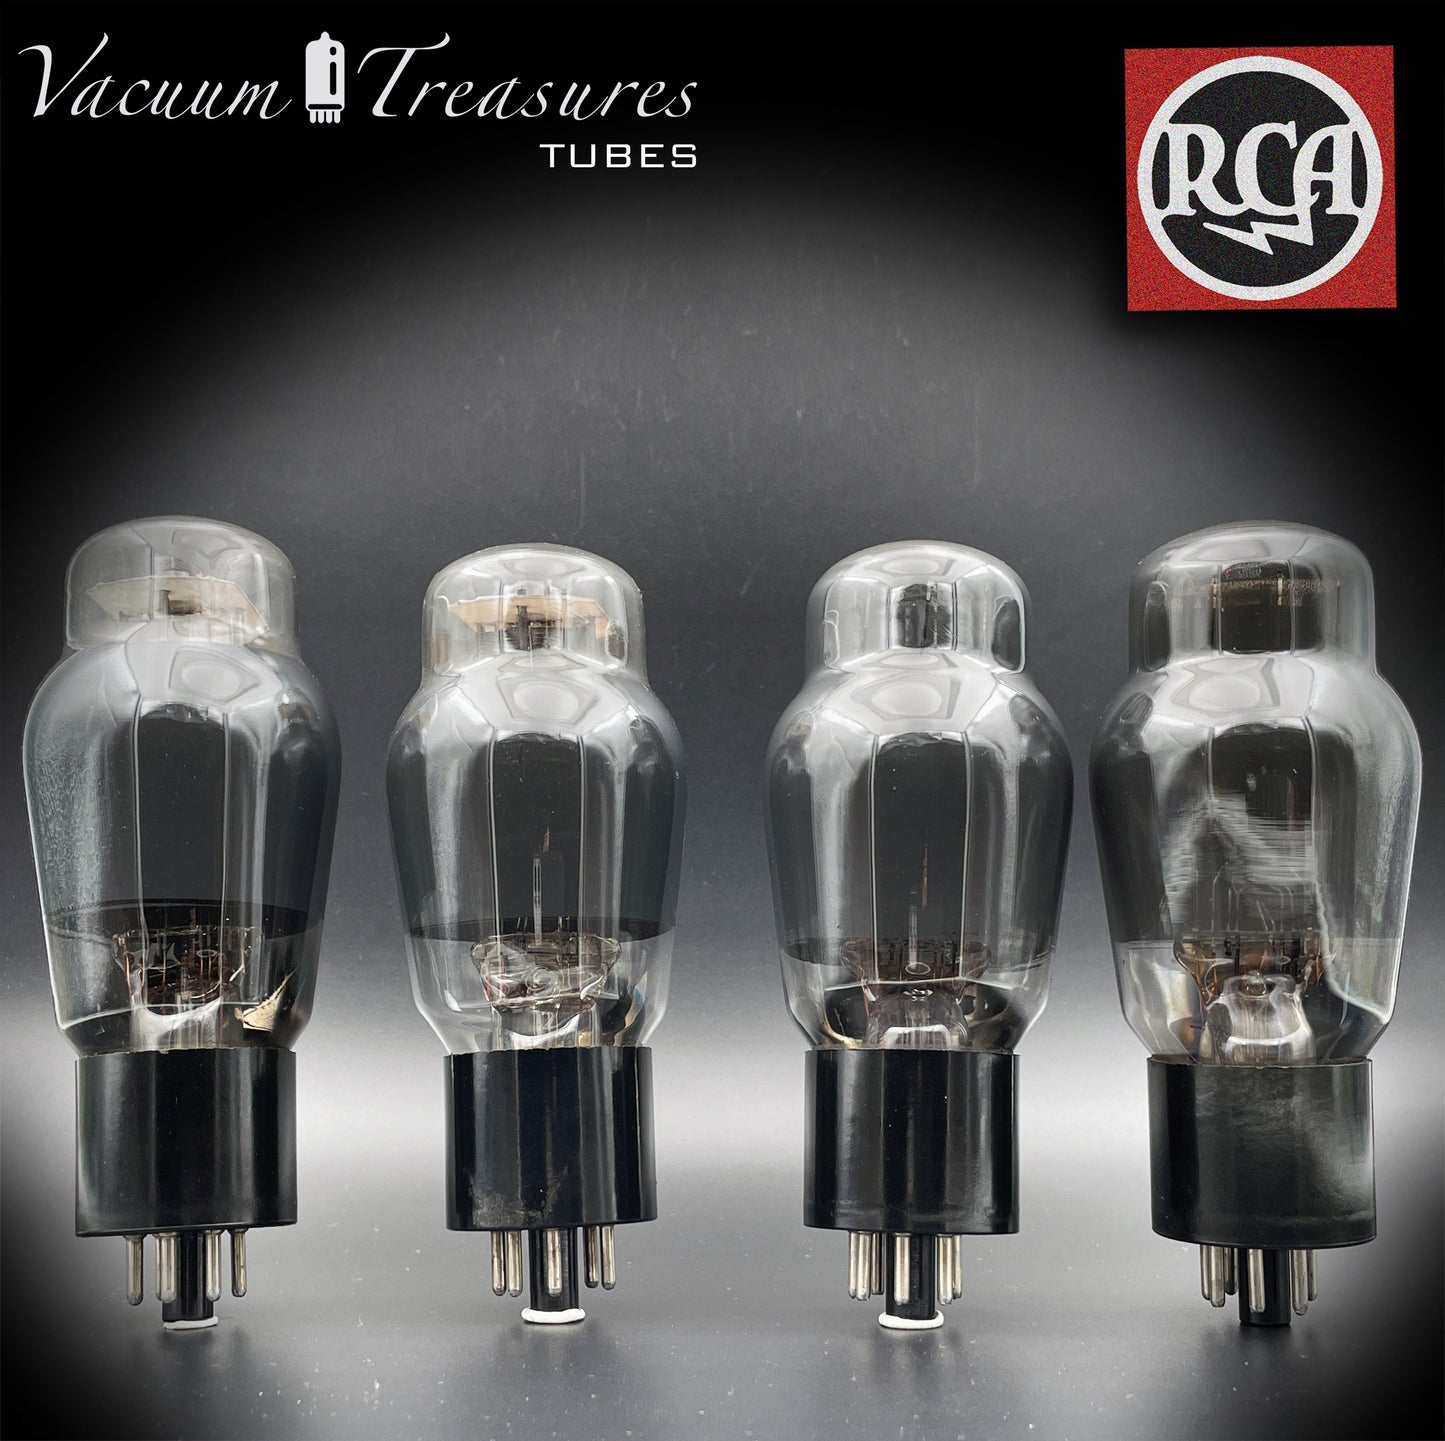 6L6G RCA Black Plates Smoked Glass Square Getter Matched Tubes Made in USA